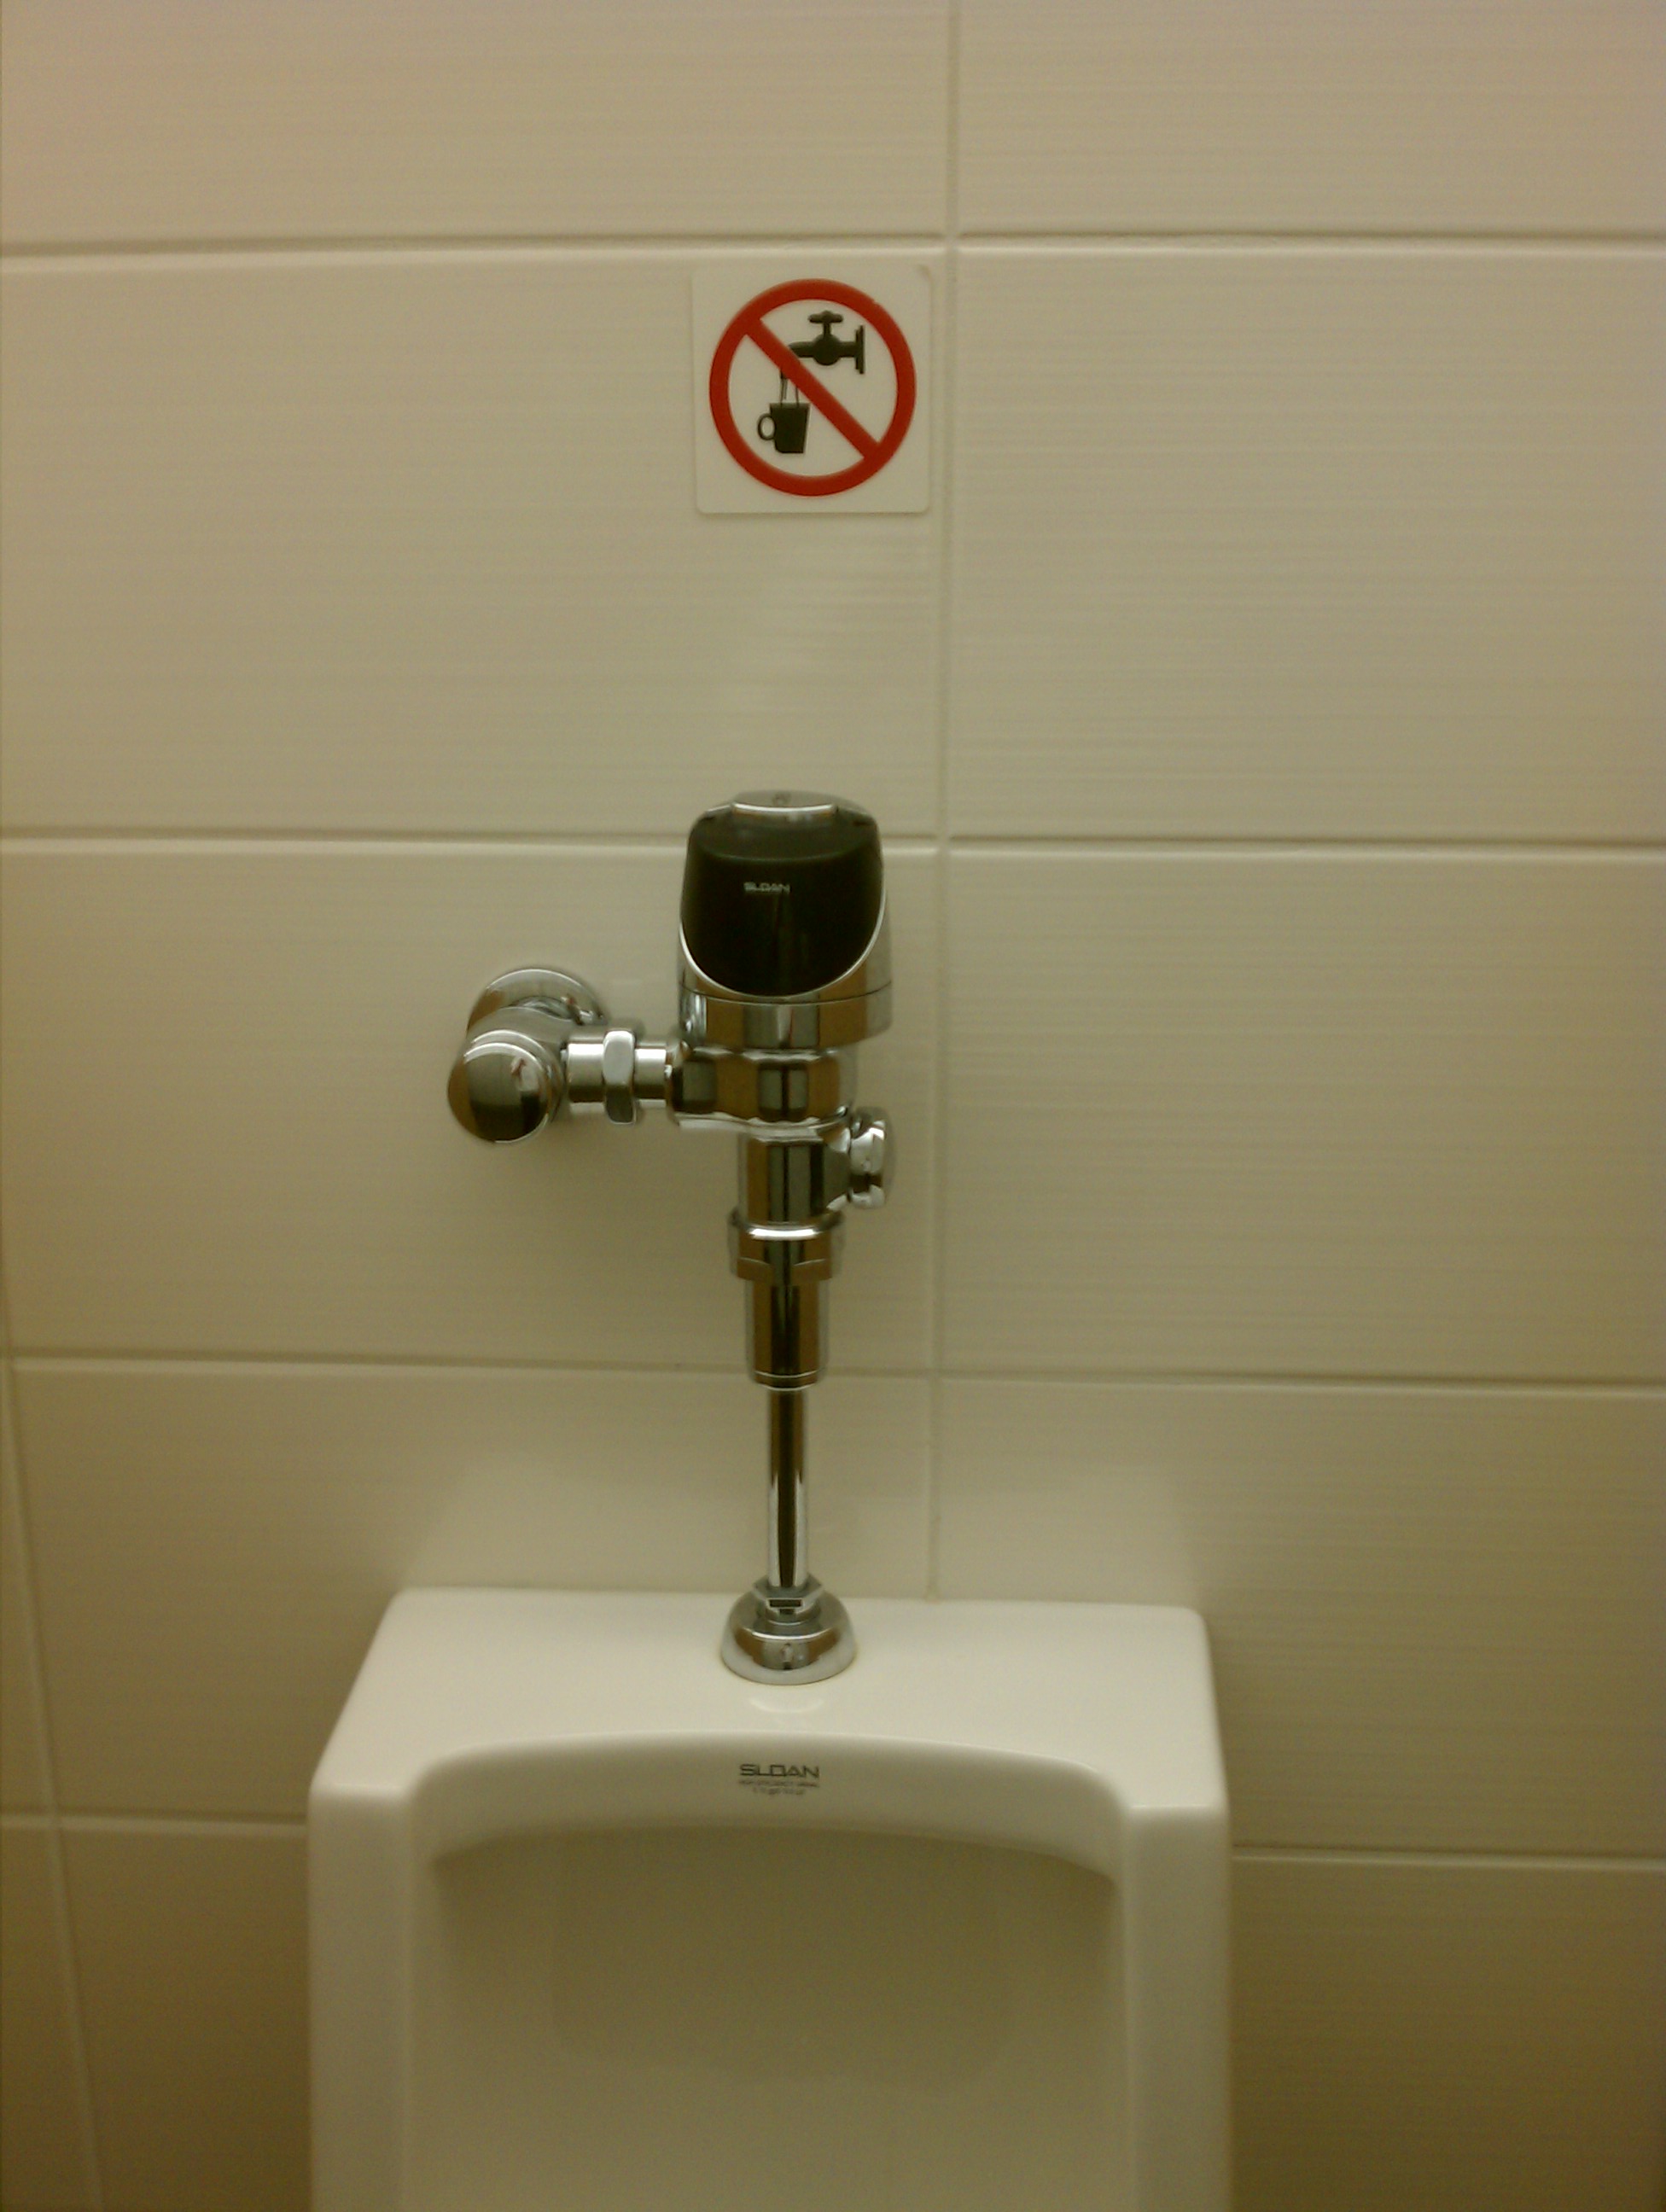 Just a heads up. Don't fill your cup with urinal water. Thanks for the info. 